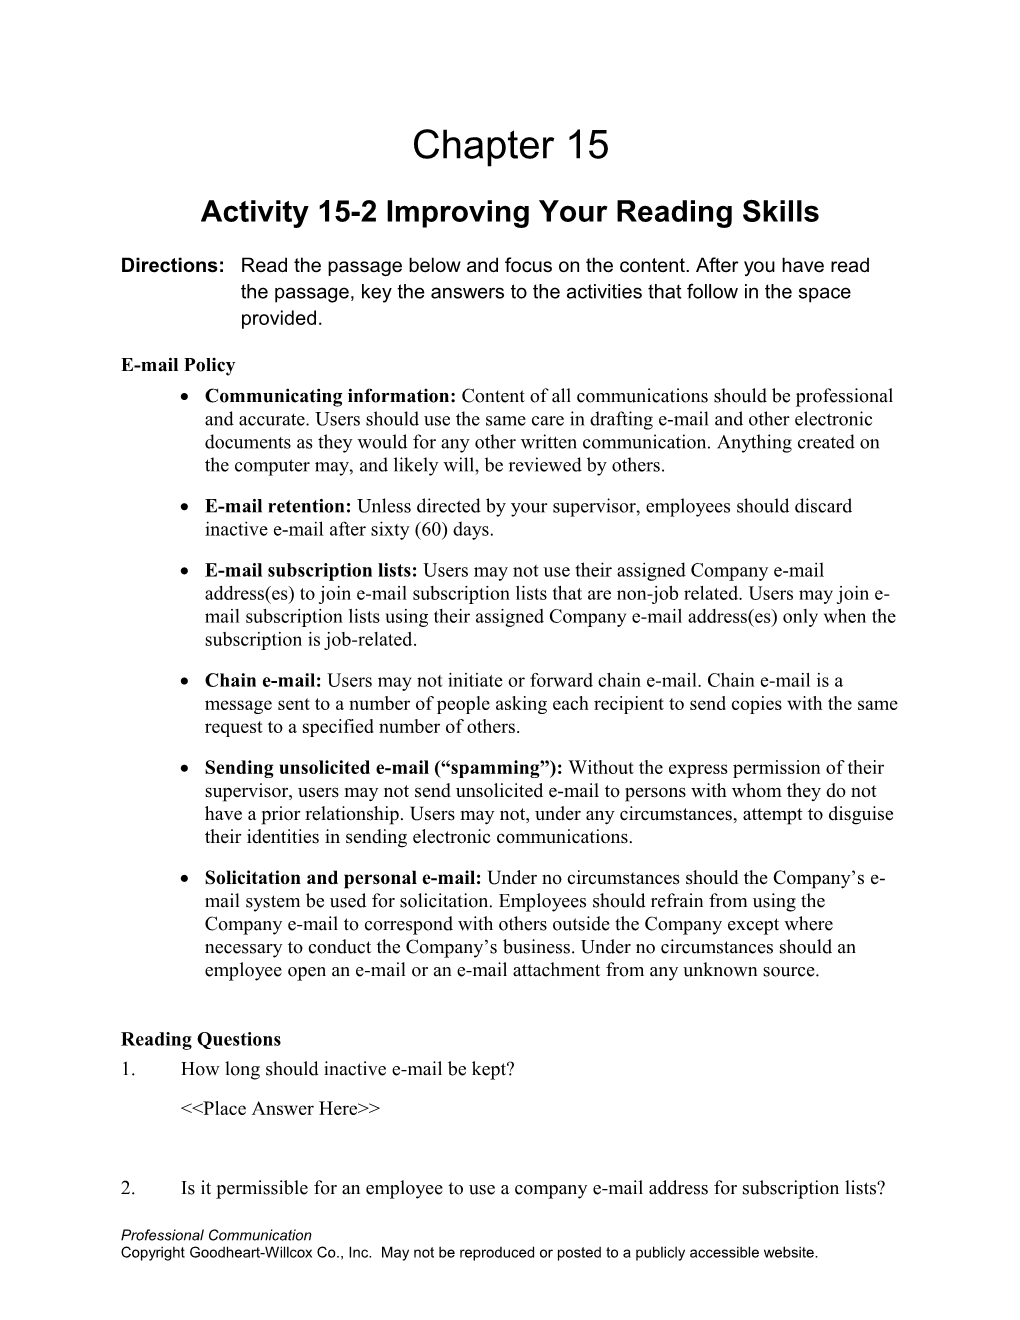 Activity 15-2 Improving Your Reading Skills